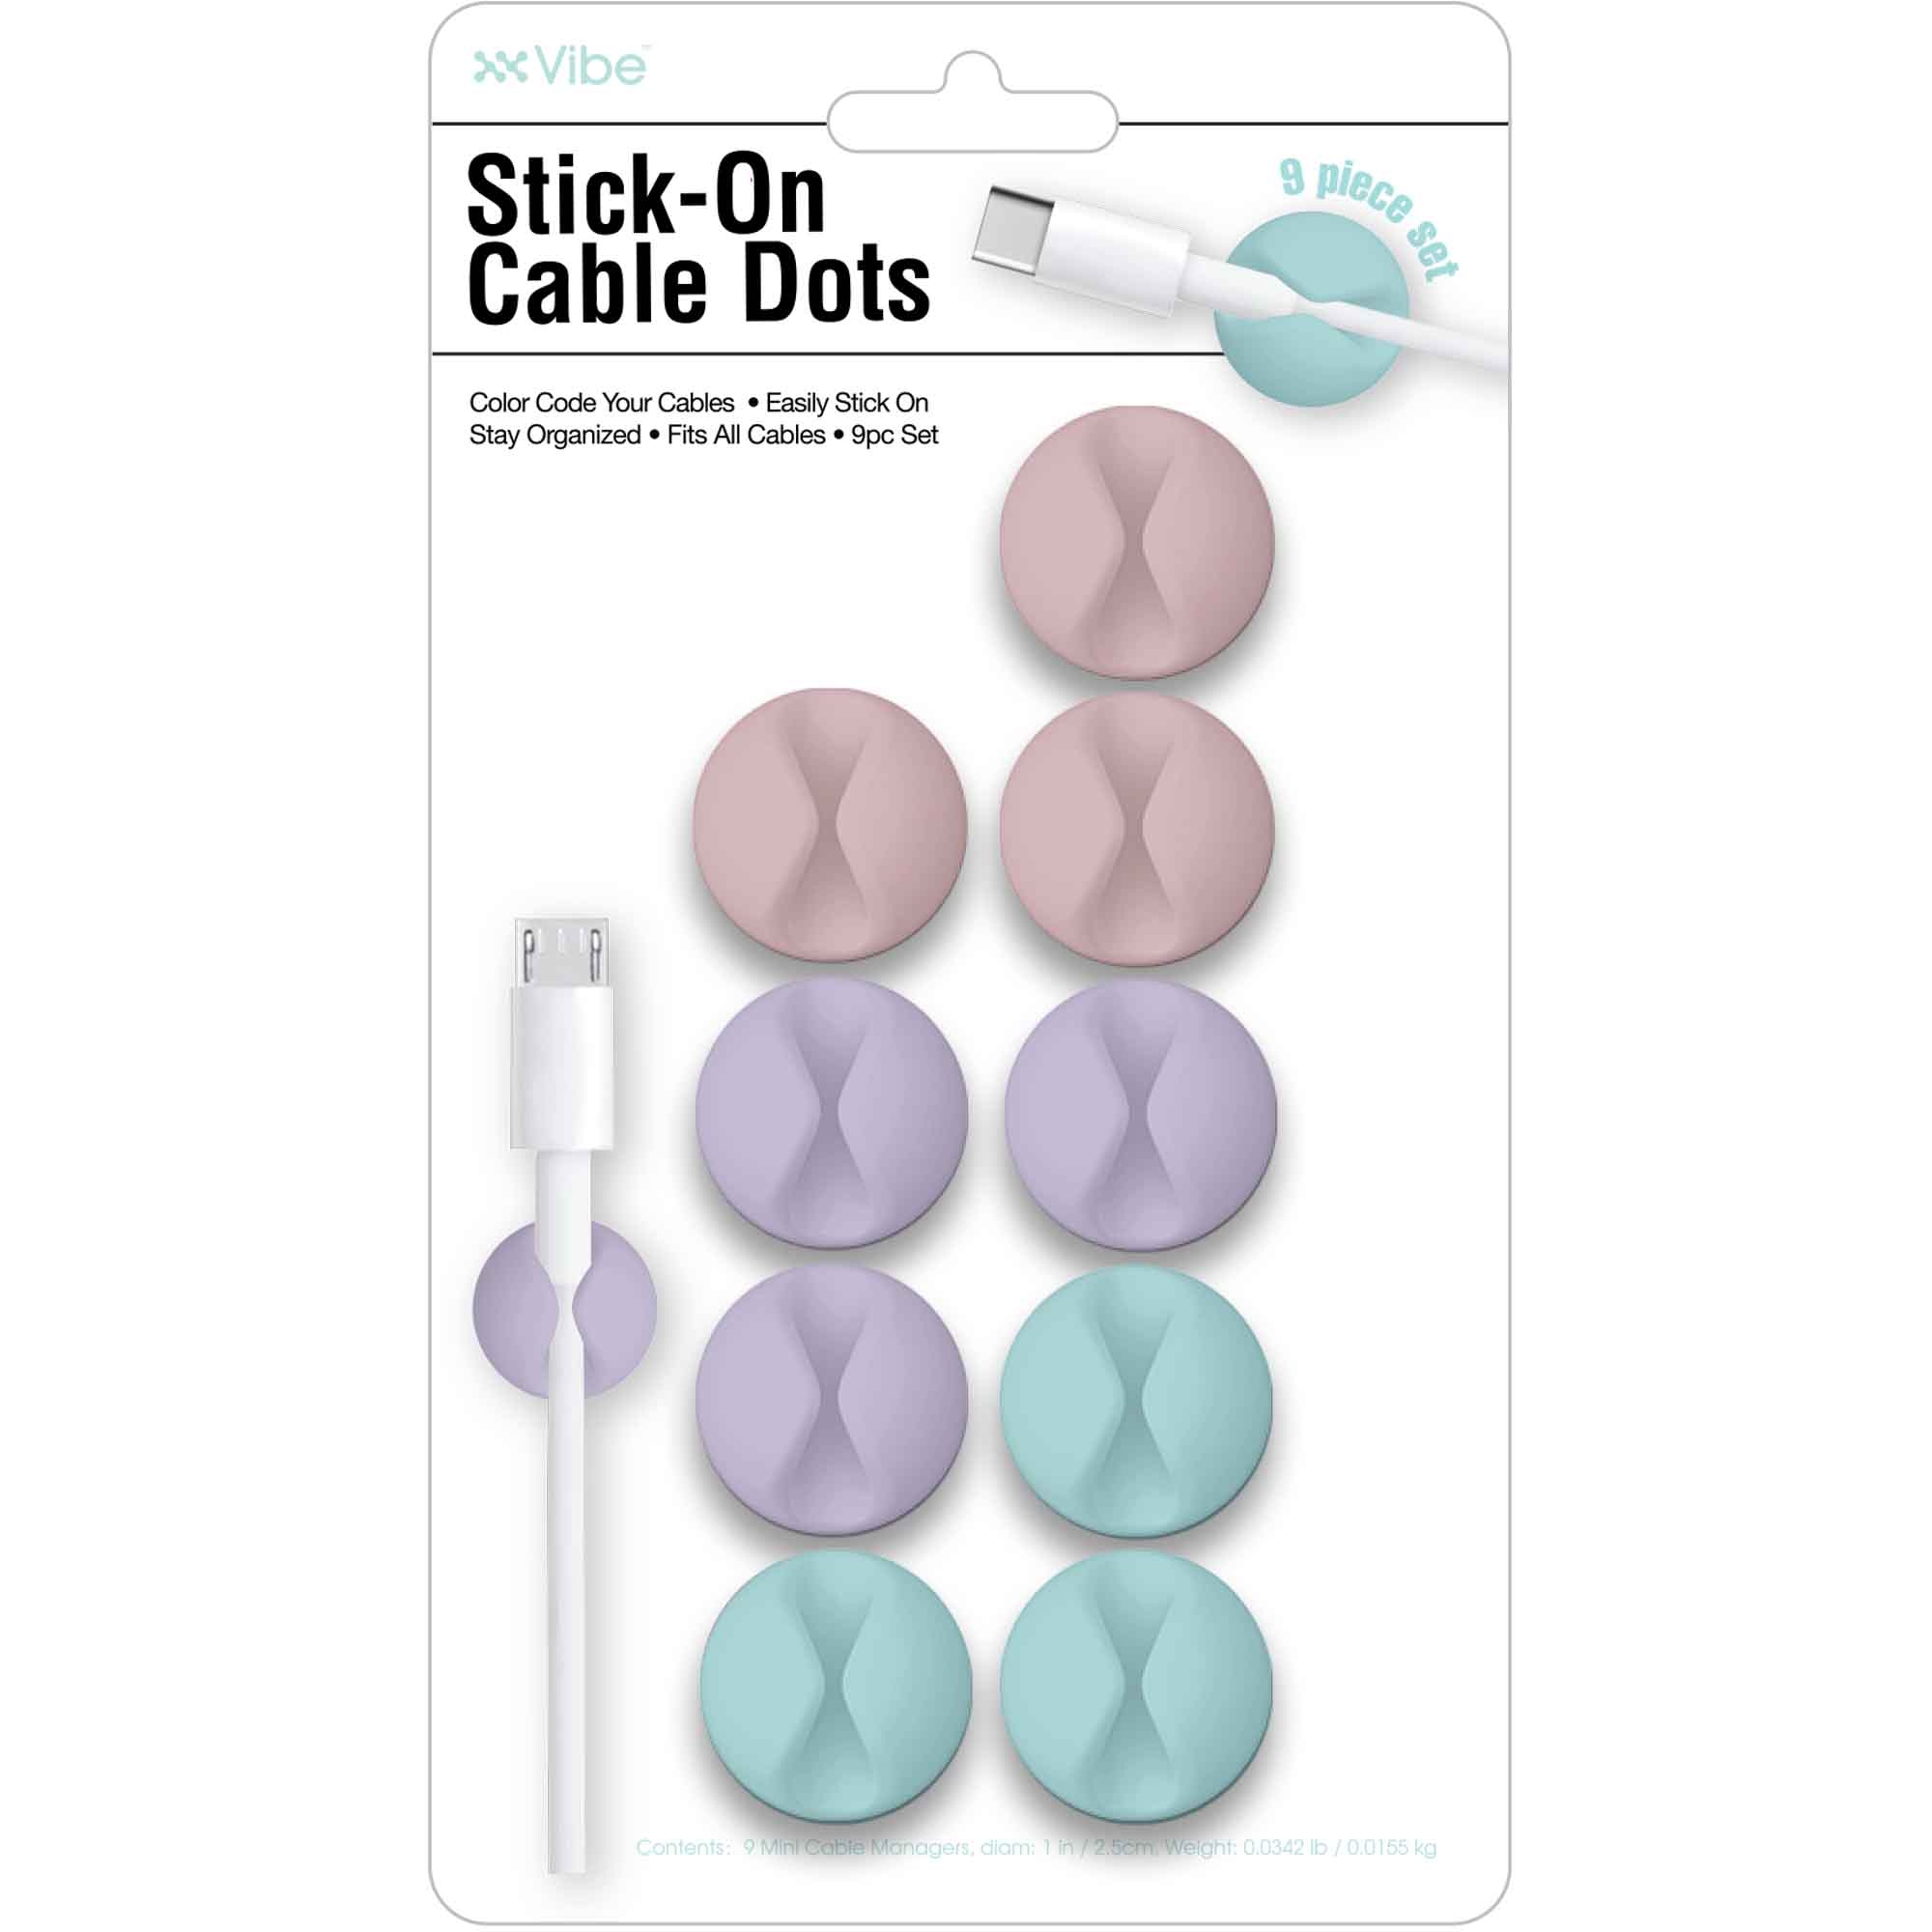 stick-on cable organizers